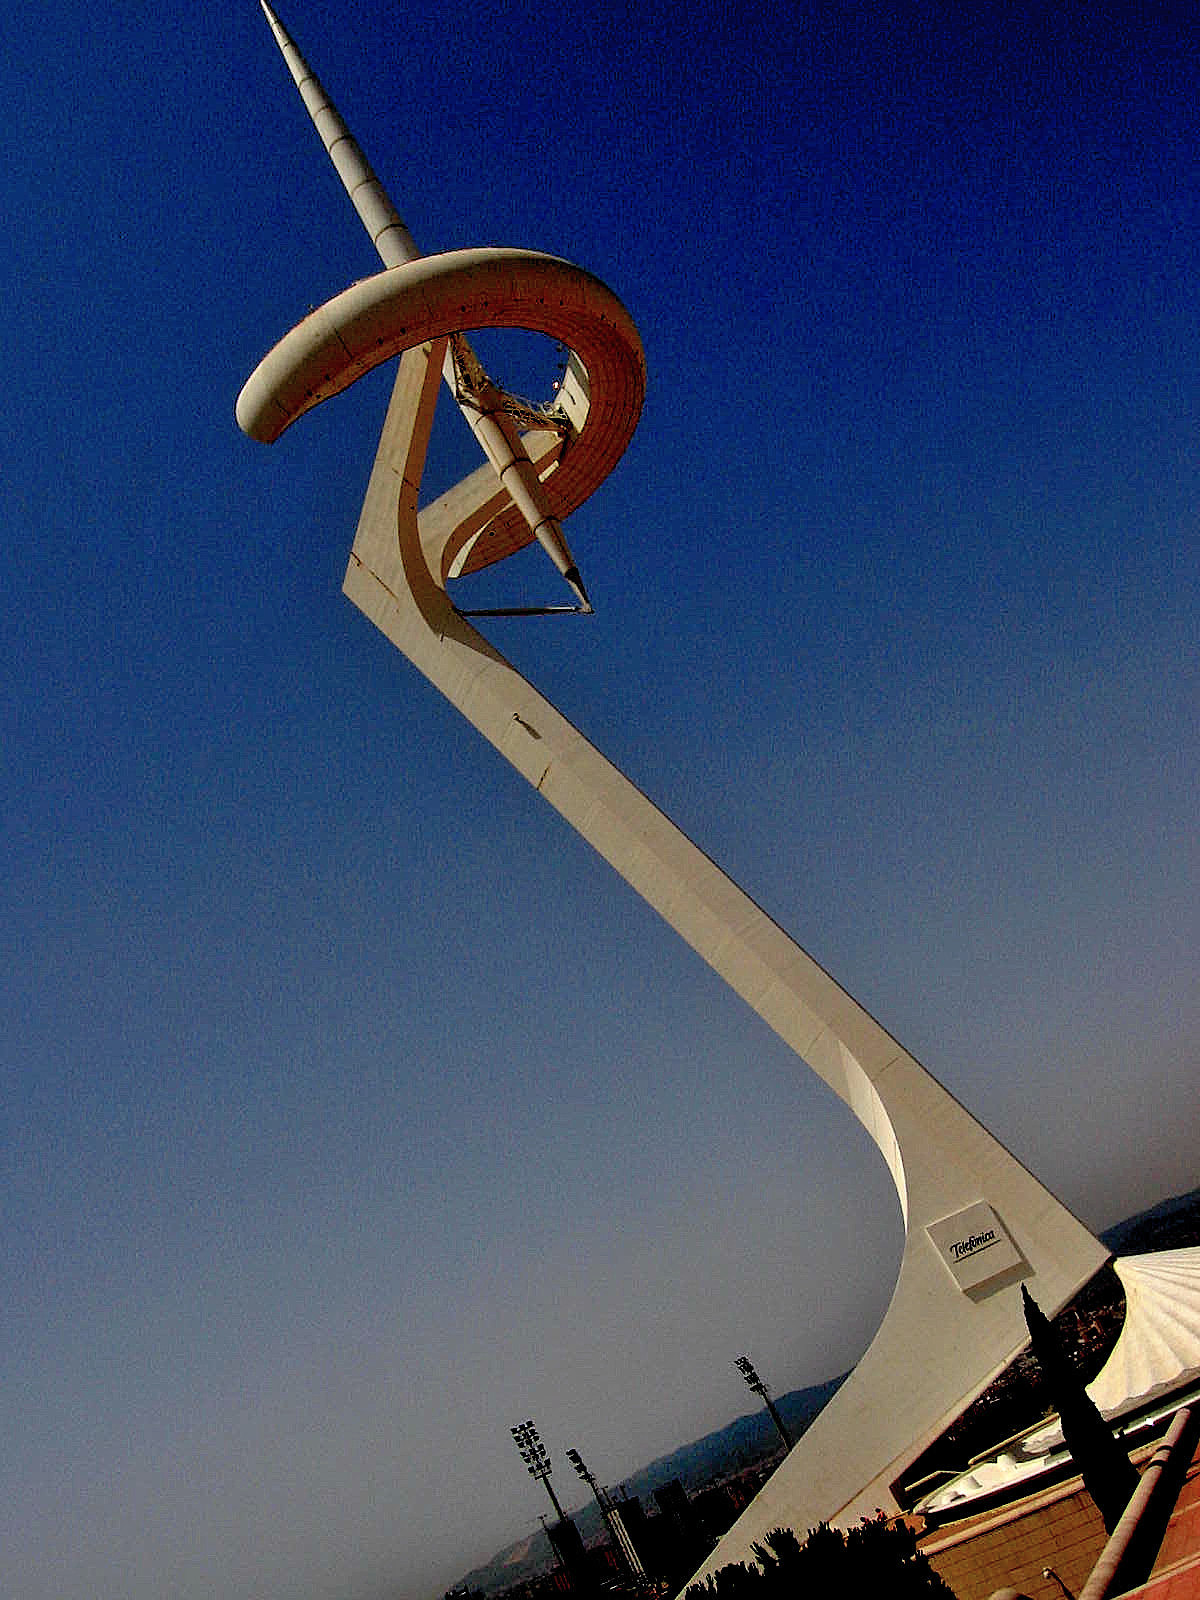 The Montjuic Communications Tower was built to transmit television coverage of the 1992 Summer Olympics Games in Barcelona - Spain 